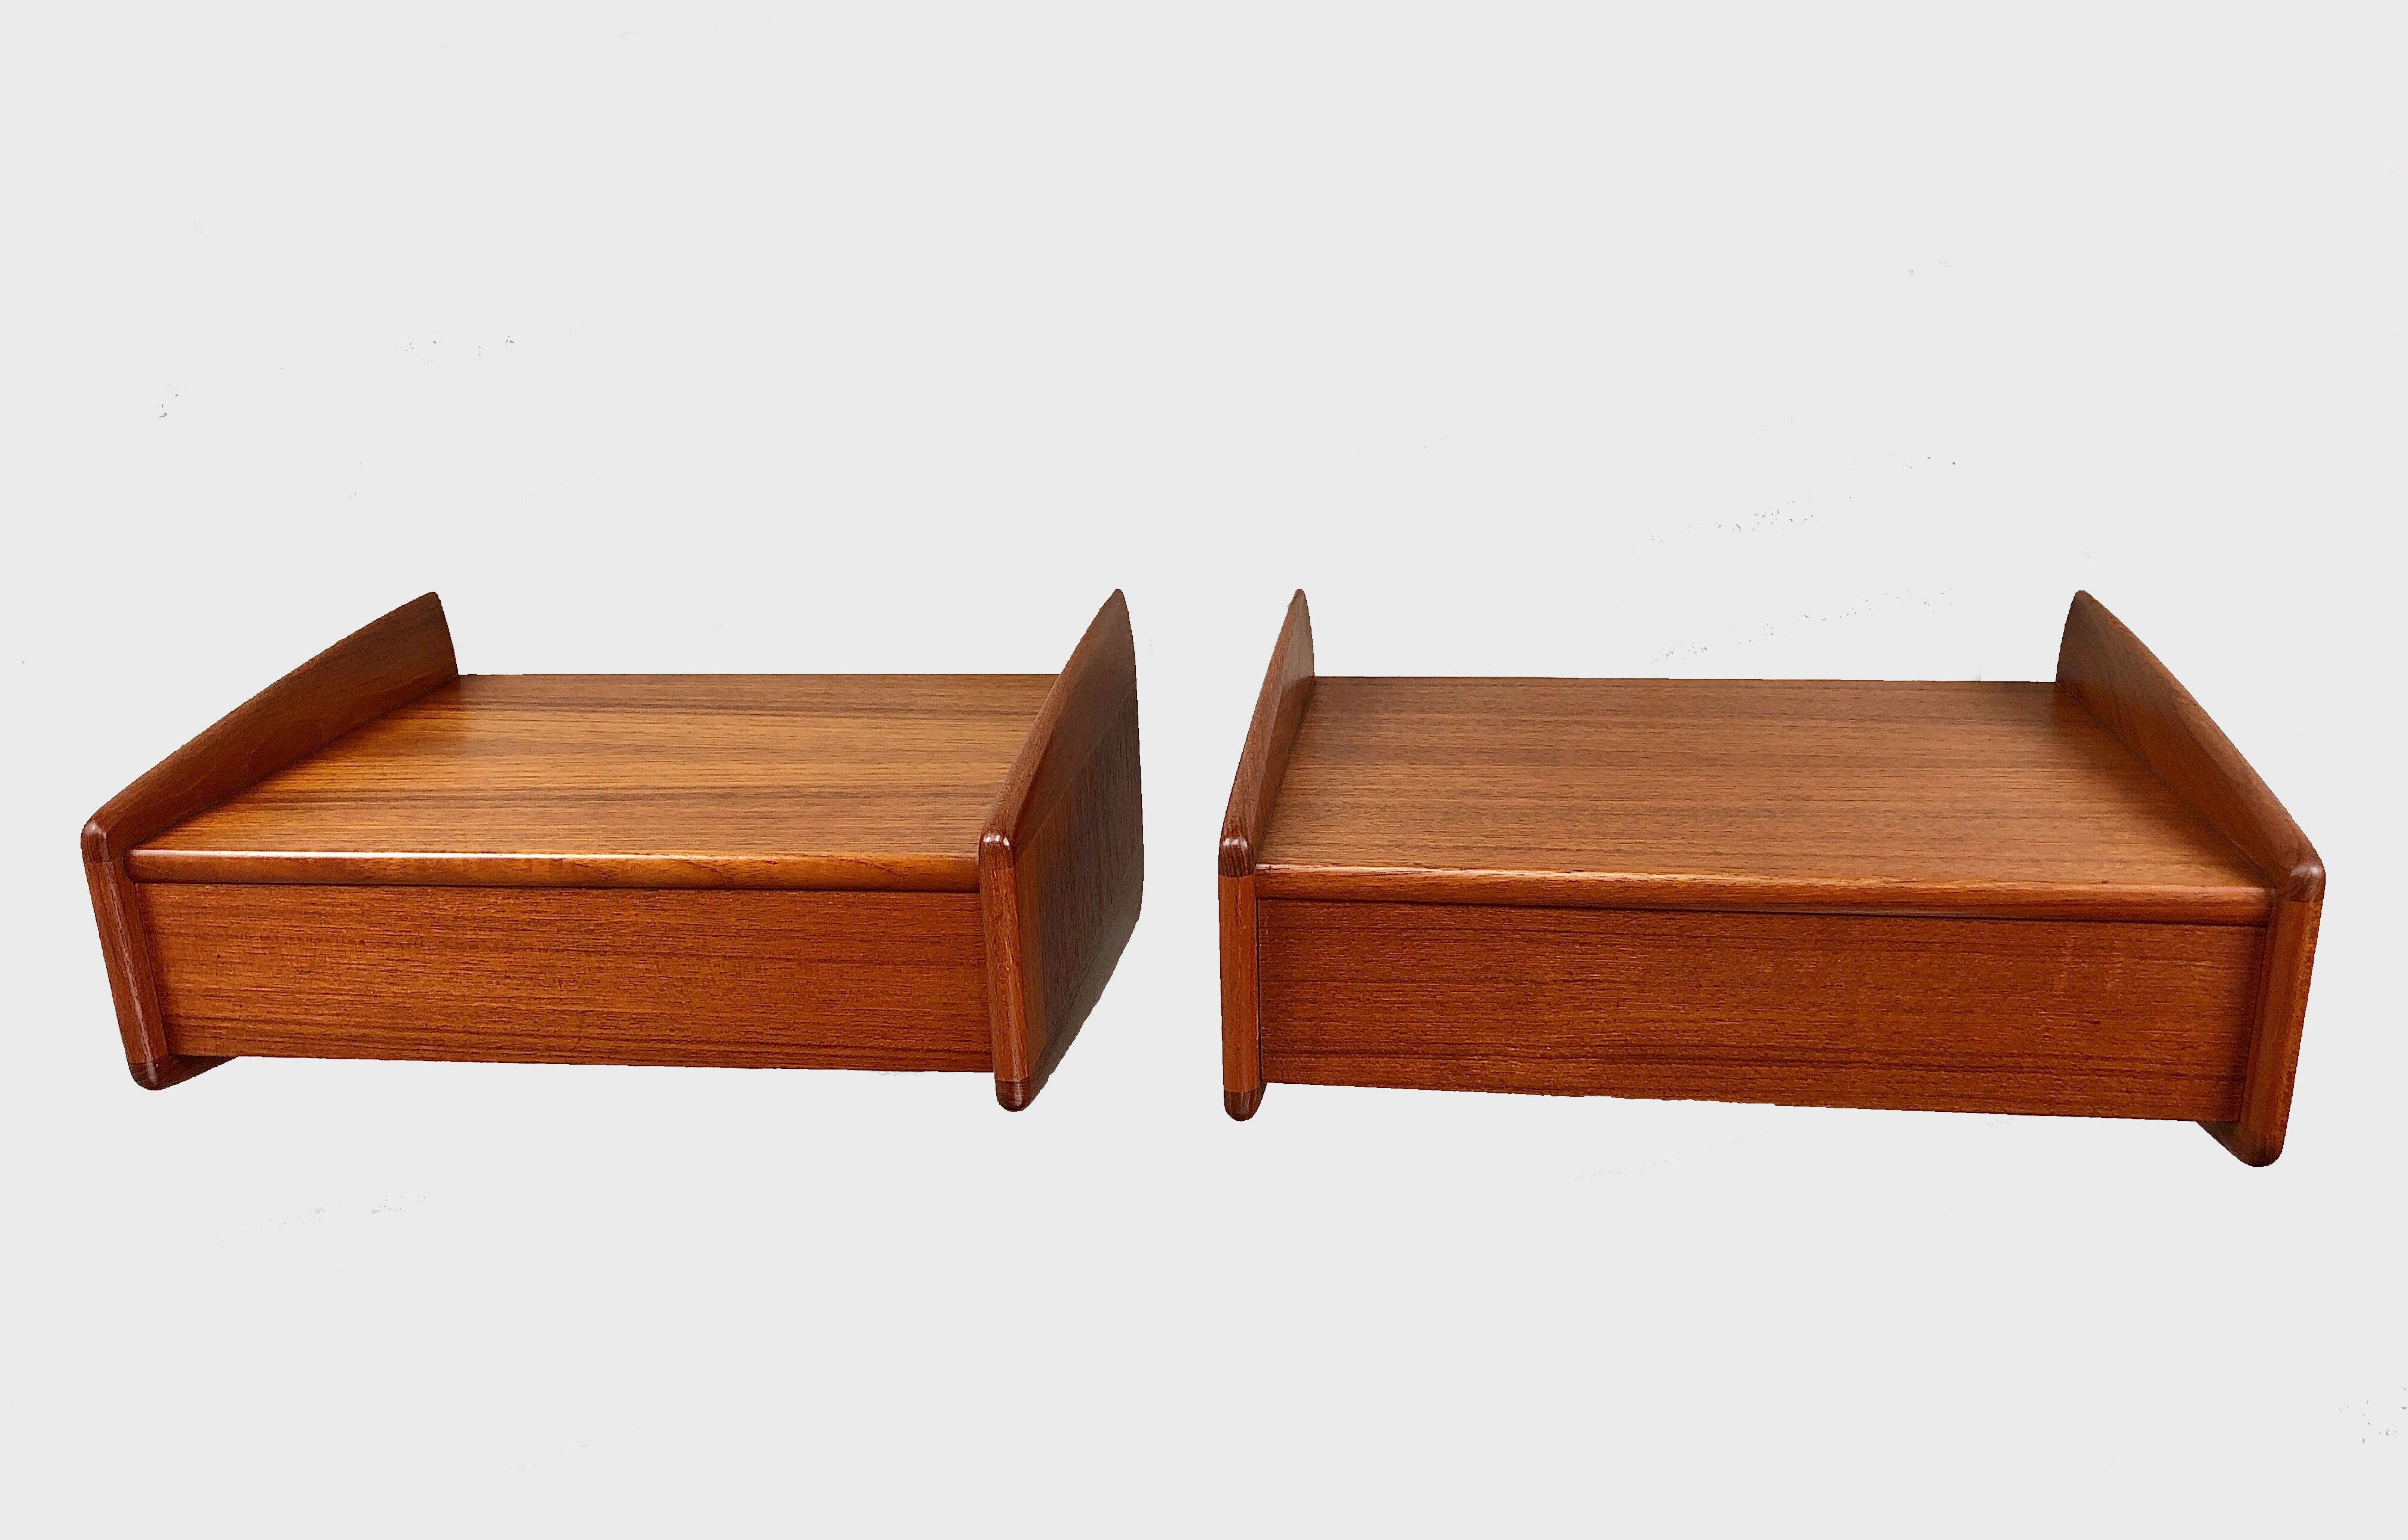 1960s set of two fully restored Danish Melvin Mikkelsen floating nightstands in teak

The well designed nightstands or shelves in teak, feature the elegant soft organic shapes and supreme craftmanship that that  characterized Melvin Mikkelsens